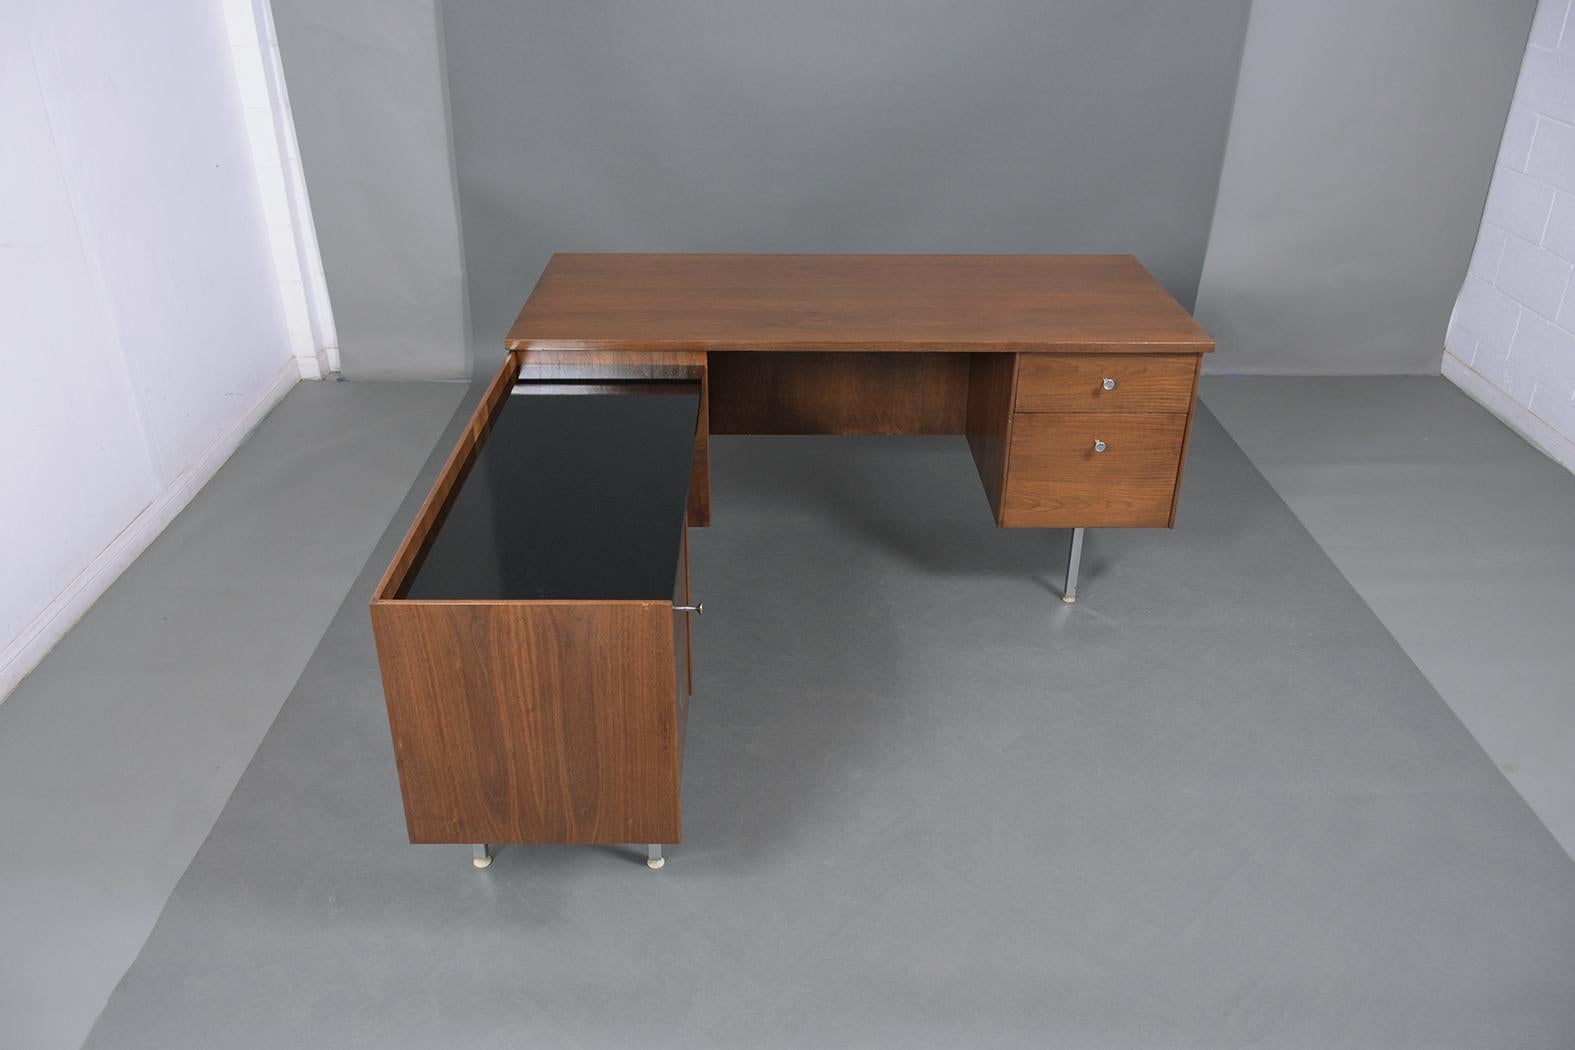 An extraordinary Mid-Century Modern 1960s desk crafted out of walnut wood professionally restored and finished by our craftsmen in the house. This piece has been newly stained in a walnut color with a lacquered finish and features an L-shape design.